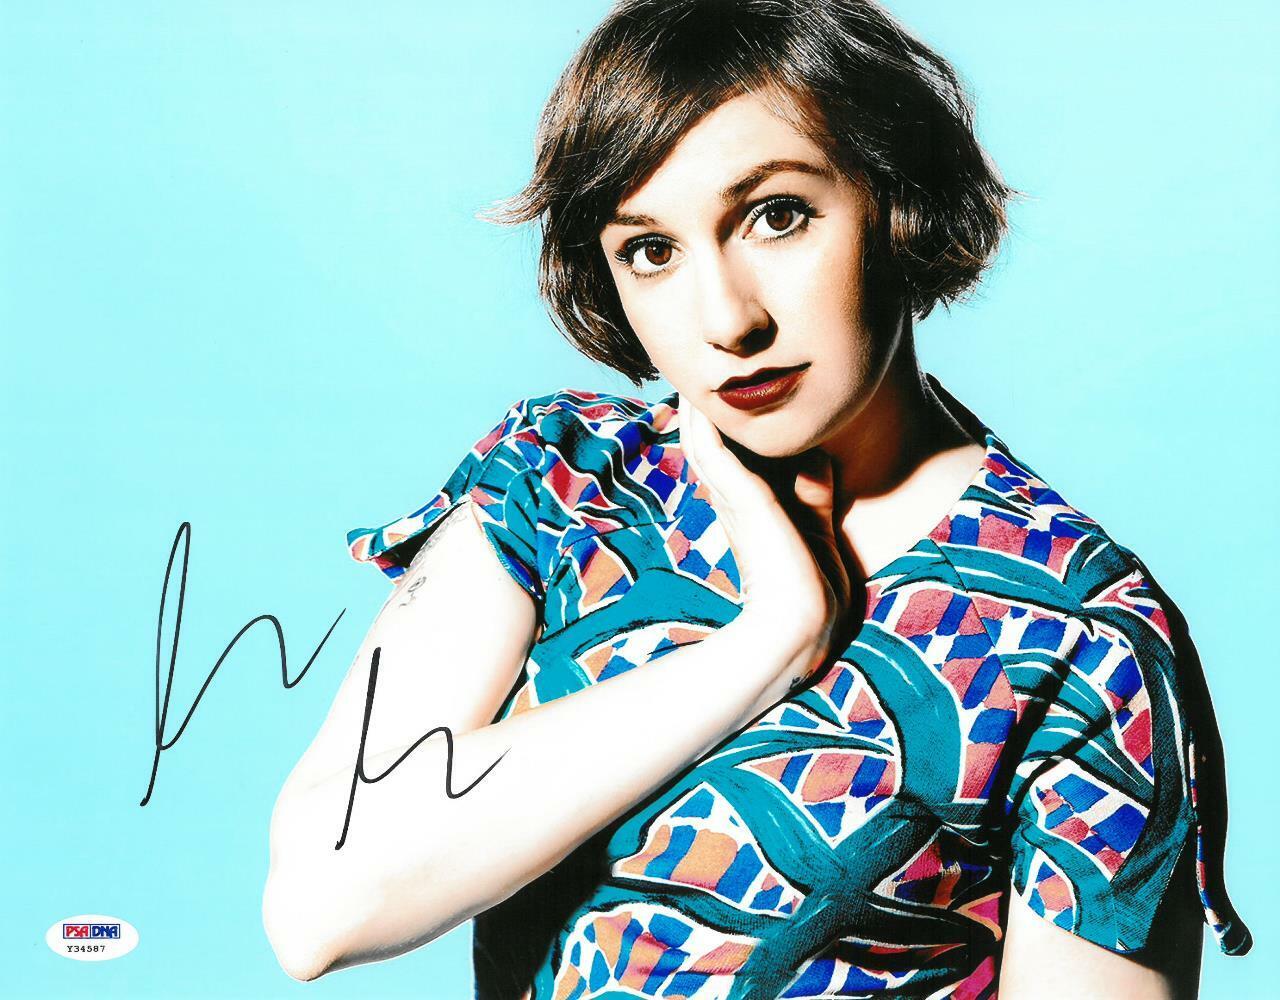 Lena Dunham Signed Authentic Autographed 11x14 Photo Poster painting PSA/DNA #Y34587